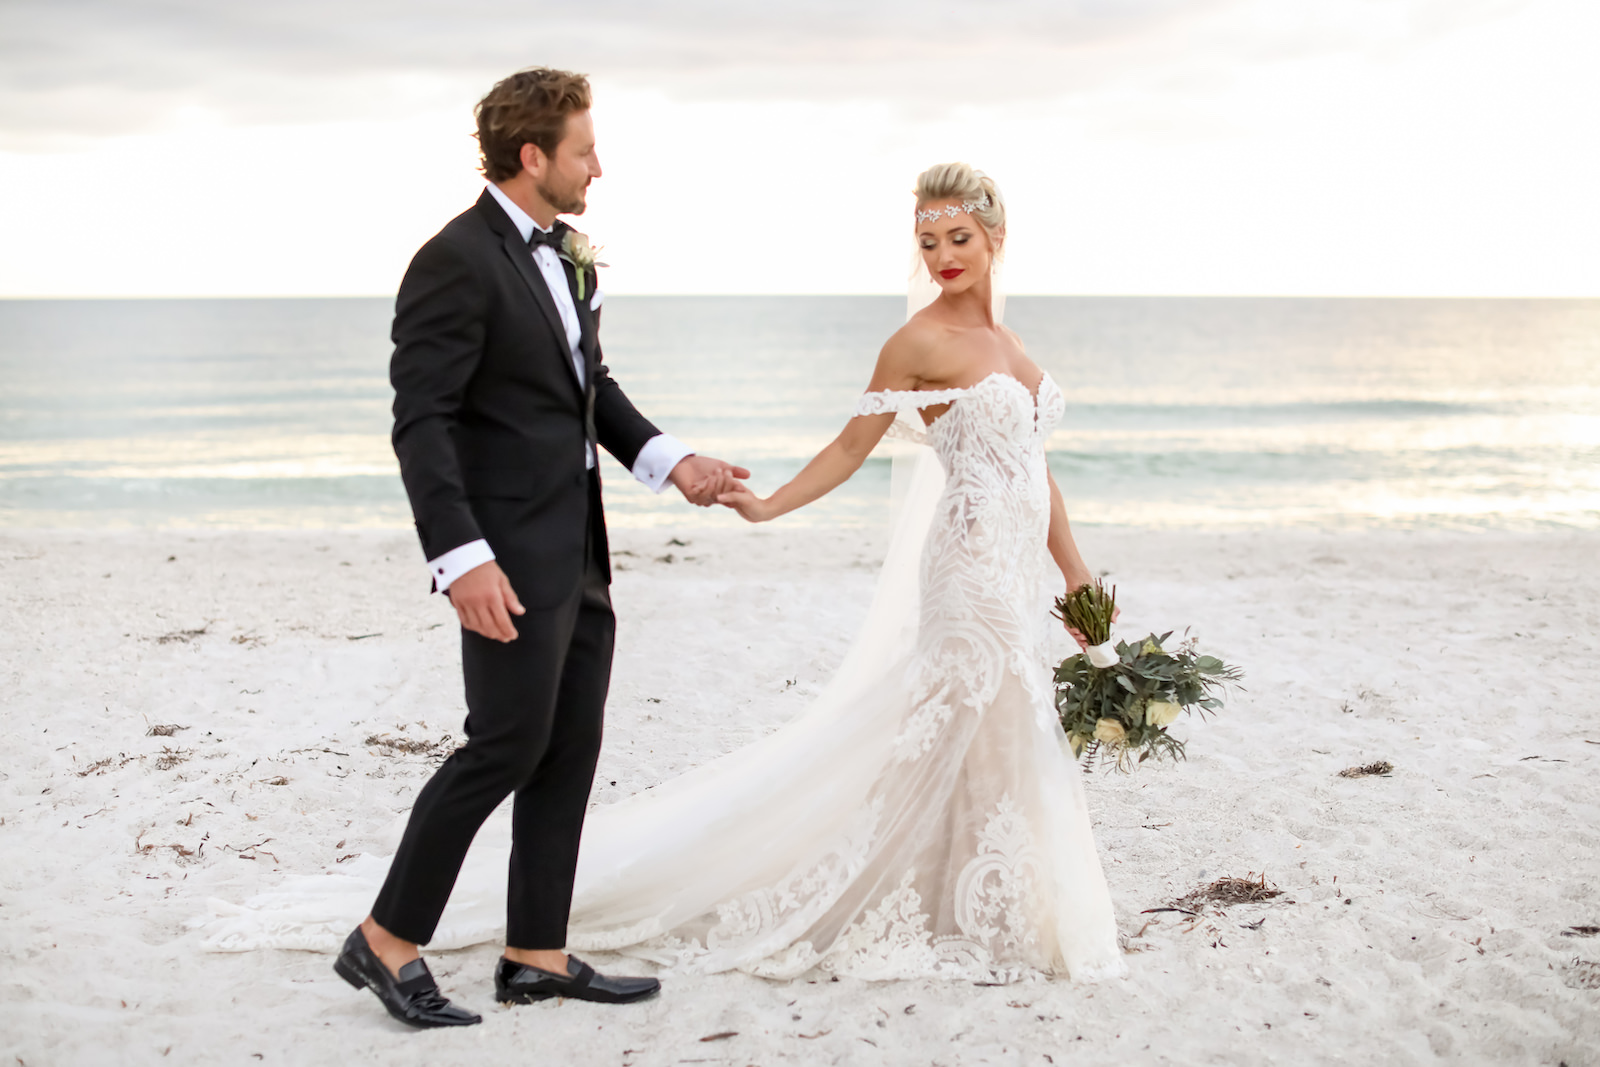 Elegant Sarasota Bride and Groom Walking on Anna Marie Island Beach at Sunset, Wearing Vintage Crystal Headpiece with White Fit and Flare Wedding Dress and Off the Shoulder Lace Sleeves, Holding Lush Ivory Floral Bouquet with Greenery, Groom in Classic Black Tuxedo | Florida Wedding Photographer Lifelong Photography Studio | Kelly Kennedy Weddings and Events